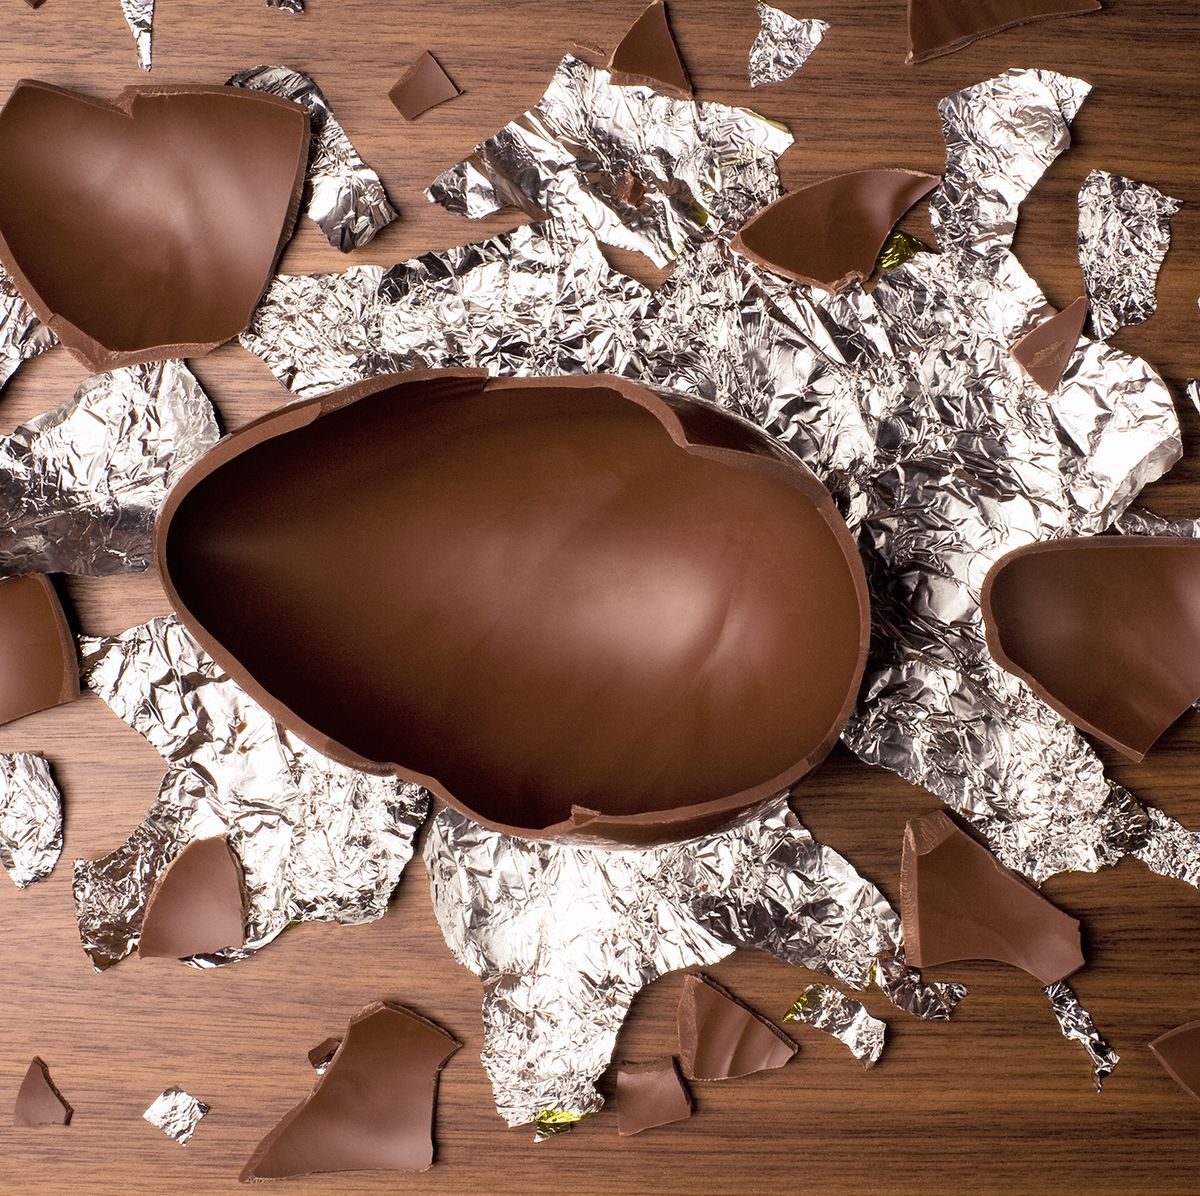 Brown Broken Chocolate Egg Cracked Shell Two Halves Stock